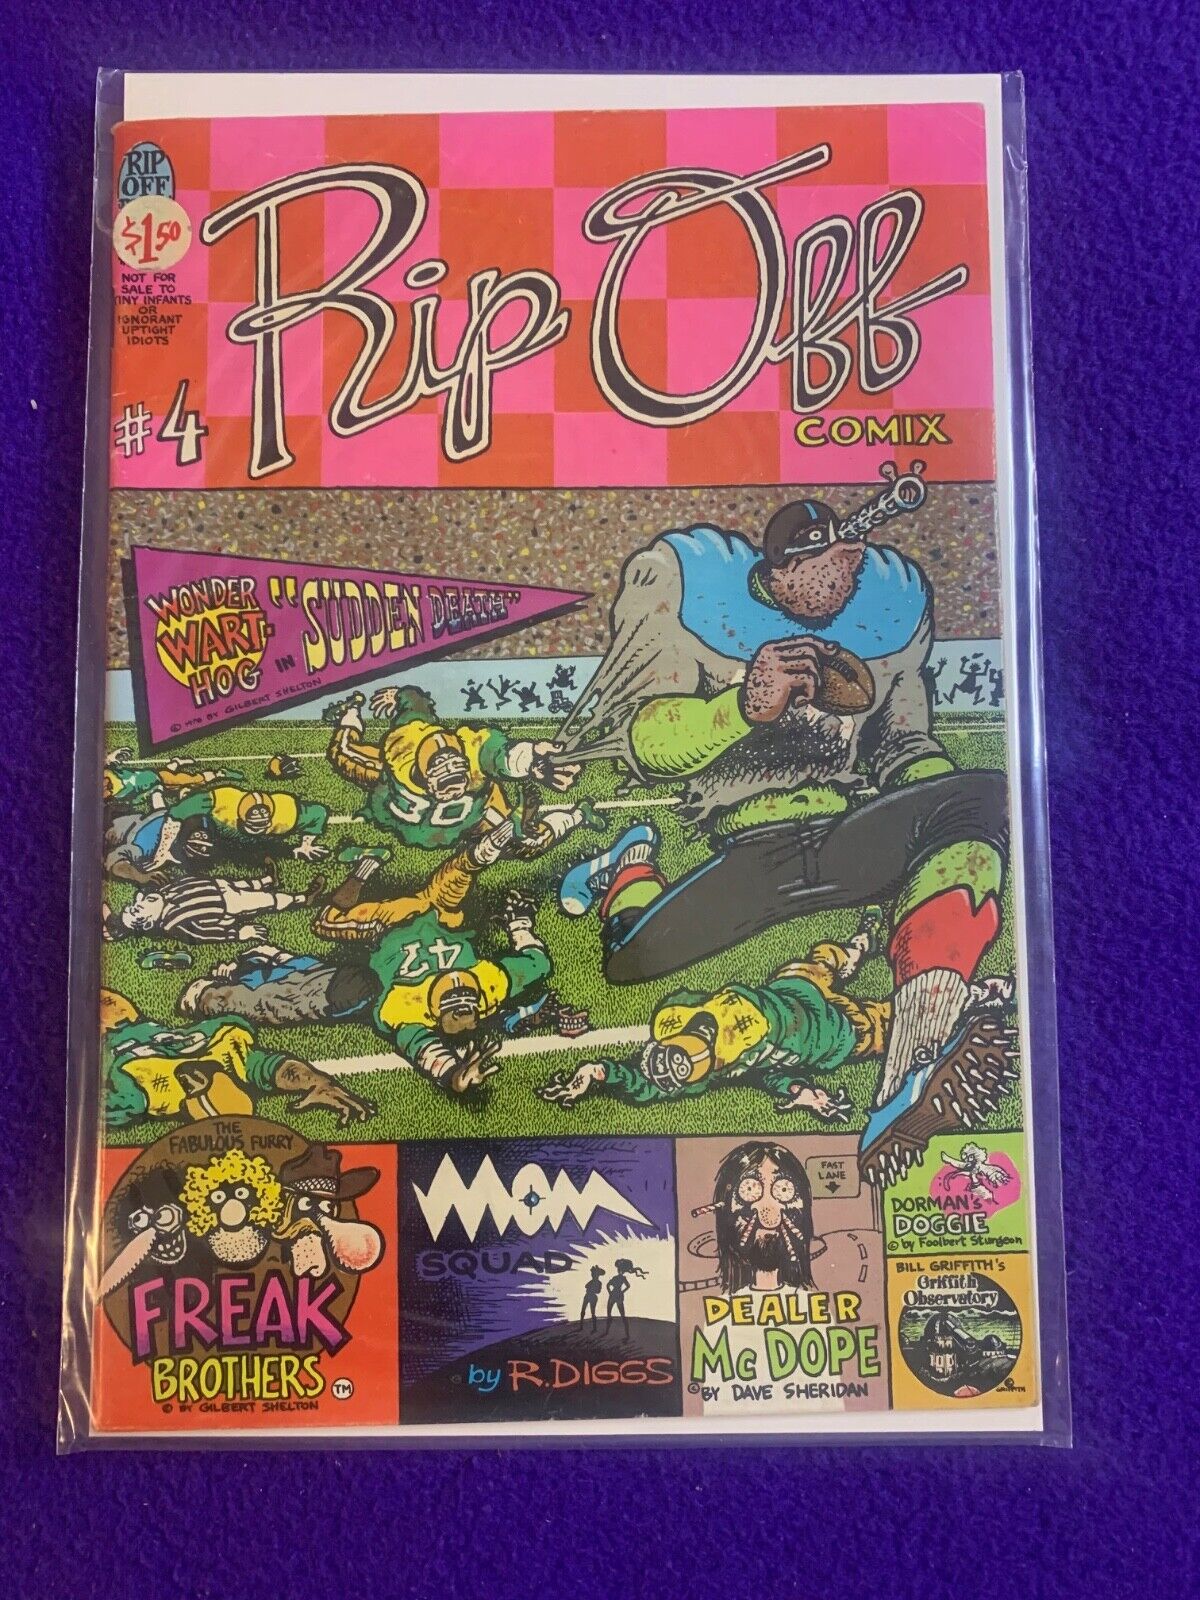 Rip Off Comix #4 By Shelton Sheridan Freak Brothers  Rip Off 1980